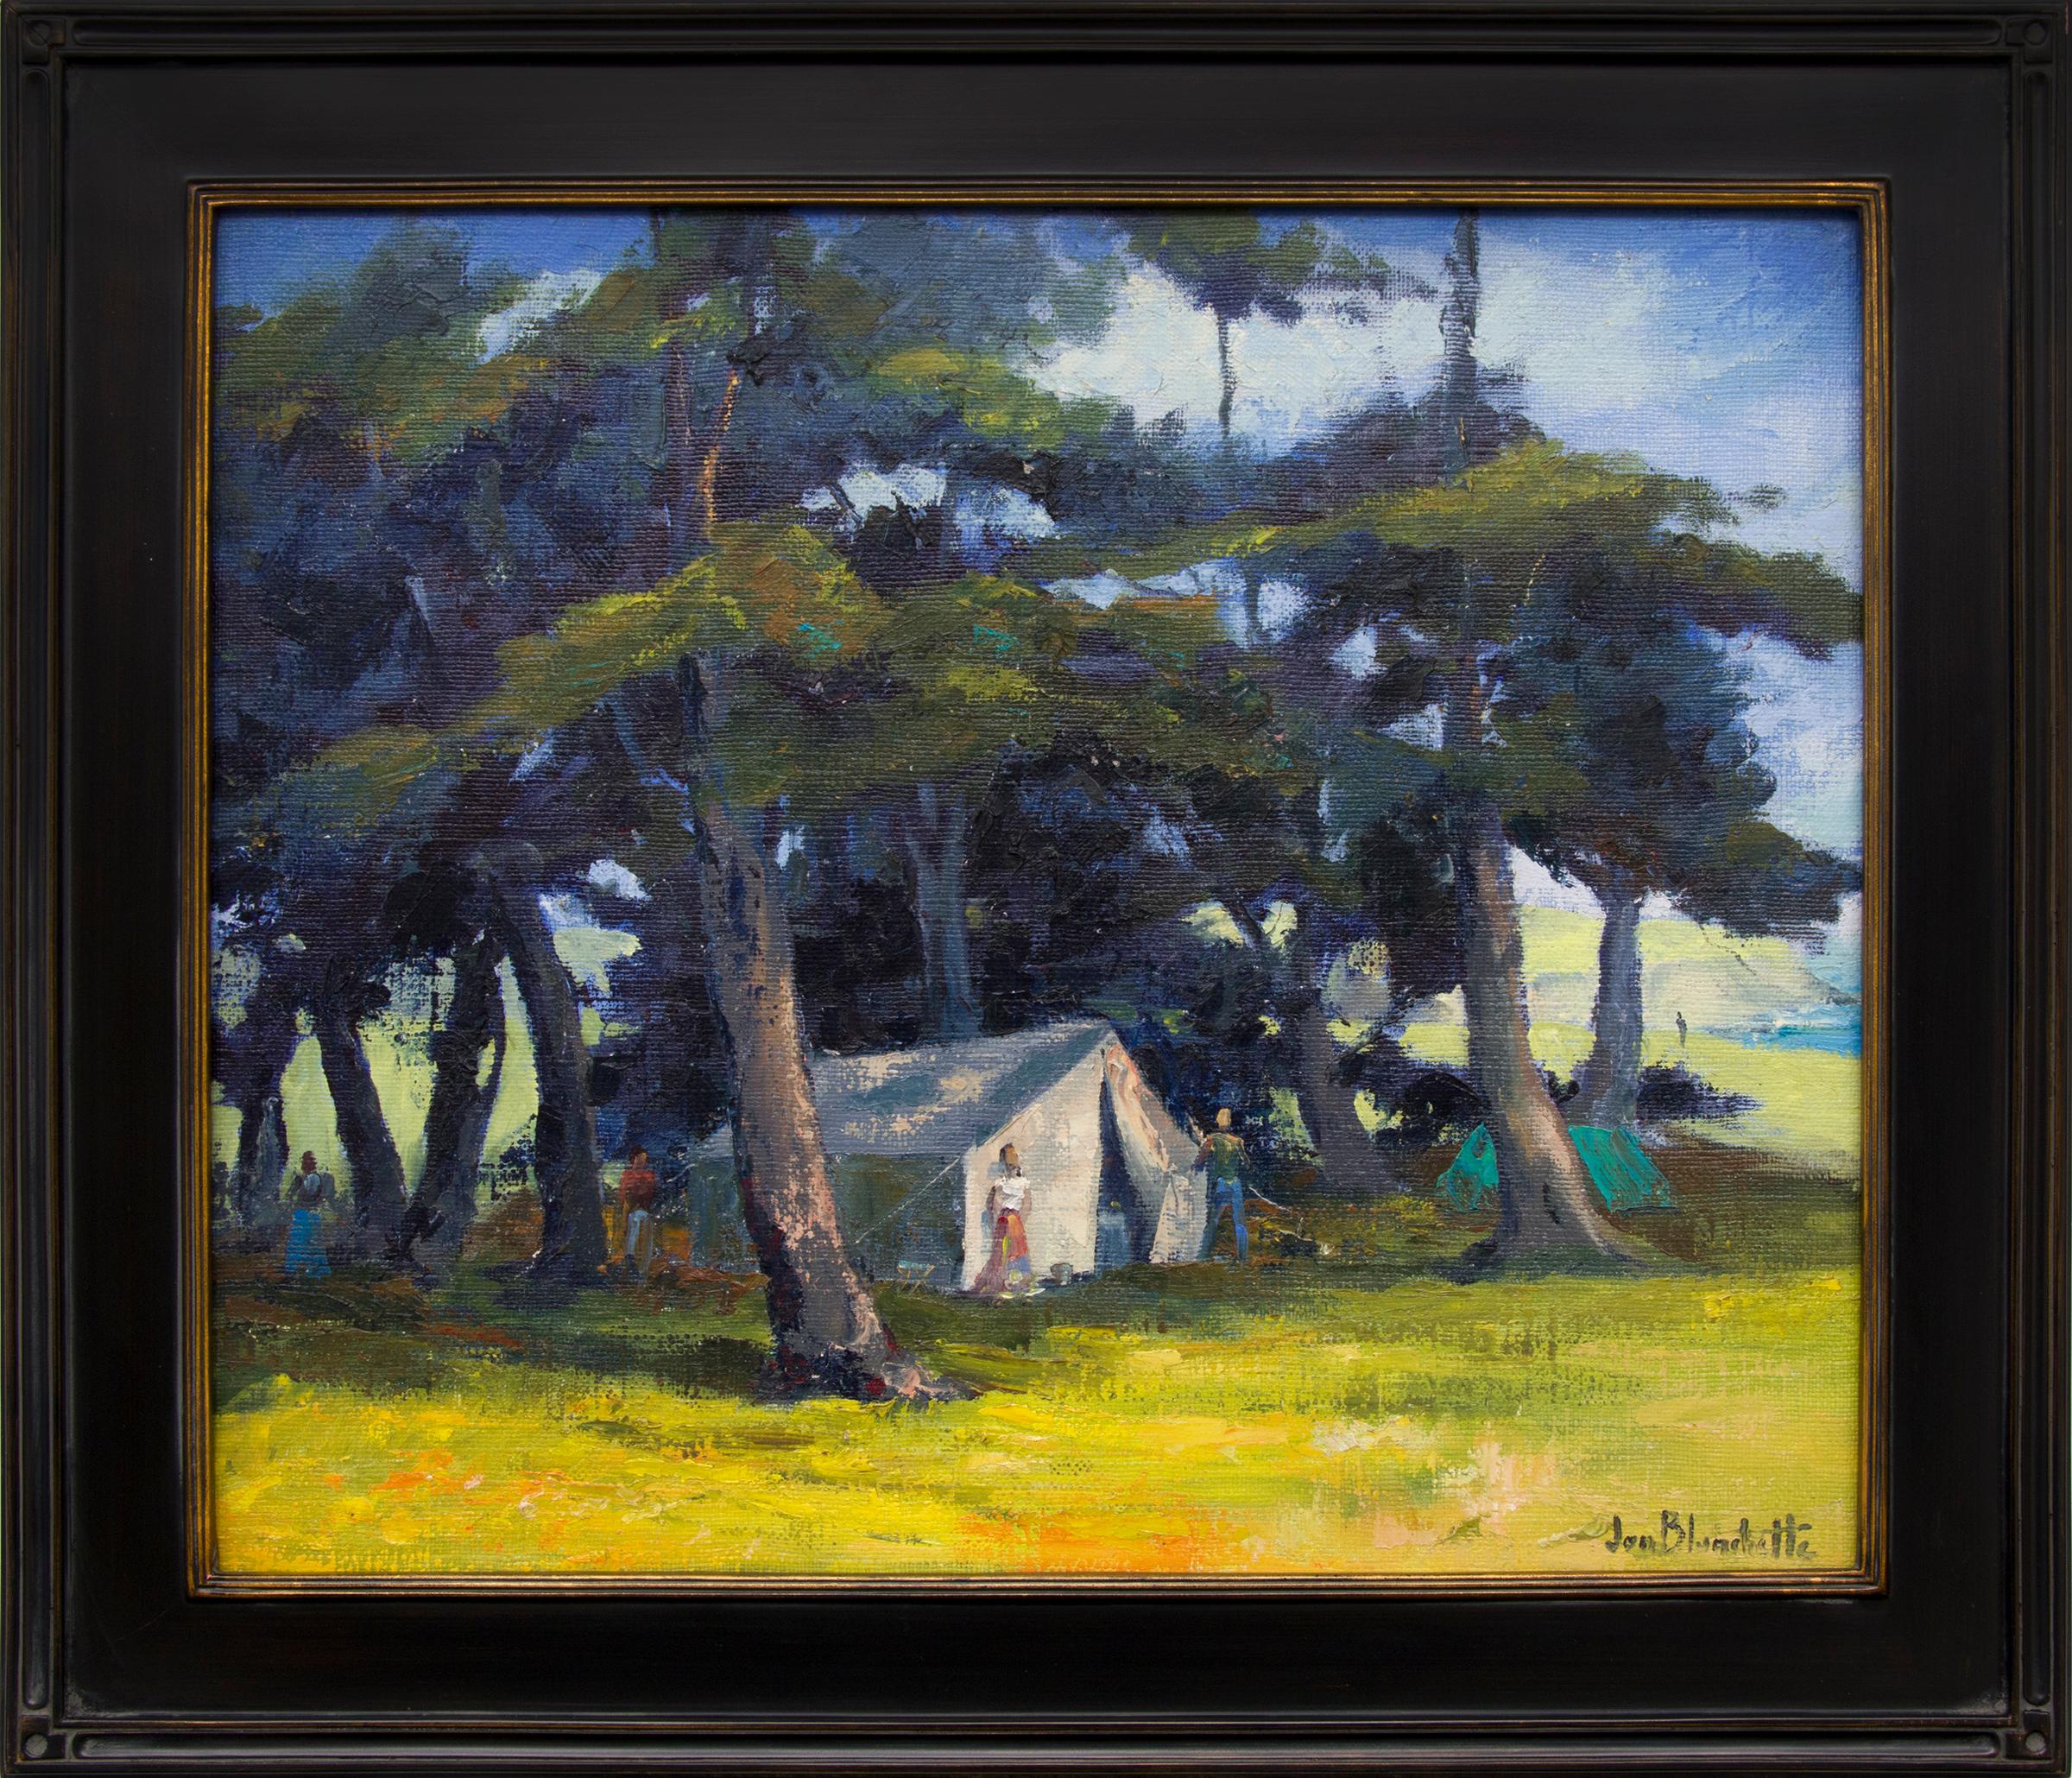 Jon Blanchette Landscape Painting - Mendocino Hippies, Framed 1960s Northern California Landscape Oil Painting 